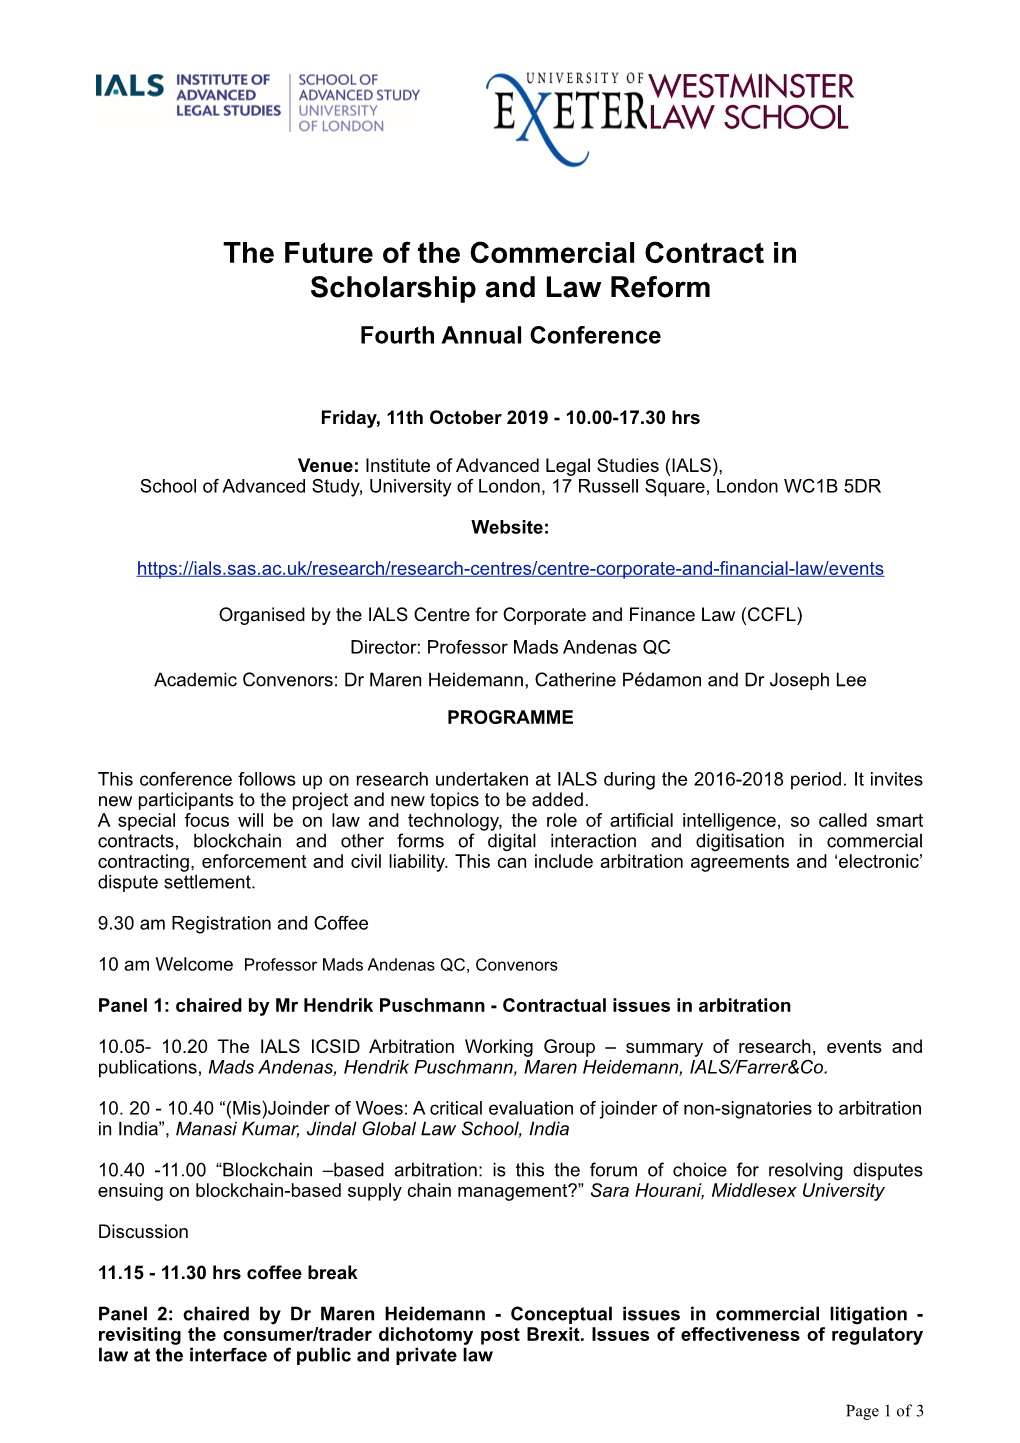 The Future of the Commercial Contract in Scholarship and Law Reform Fourth Annual Conference